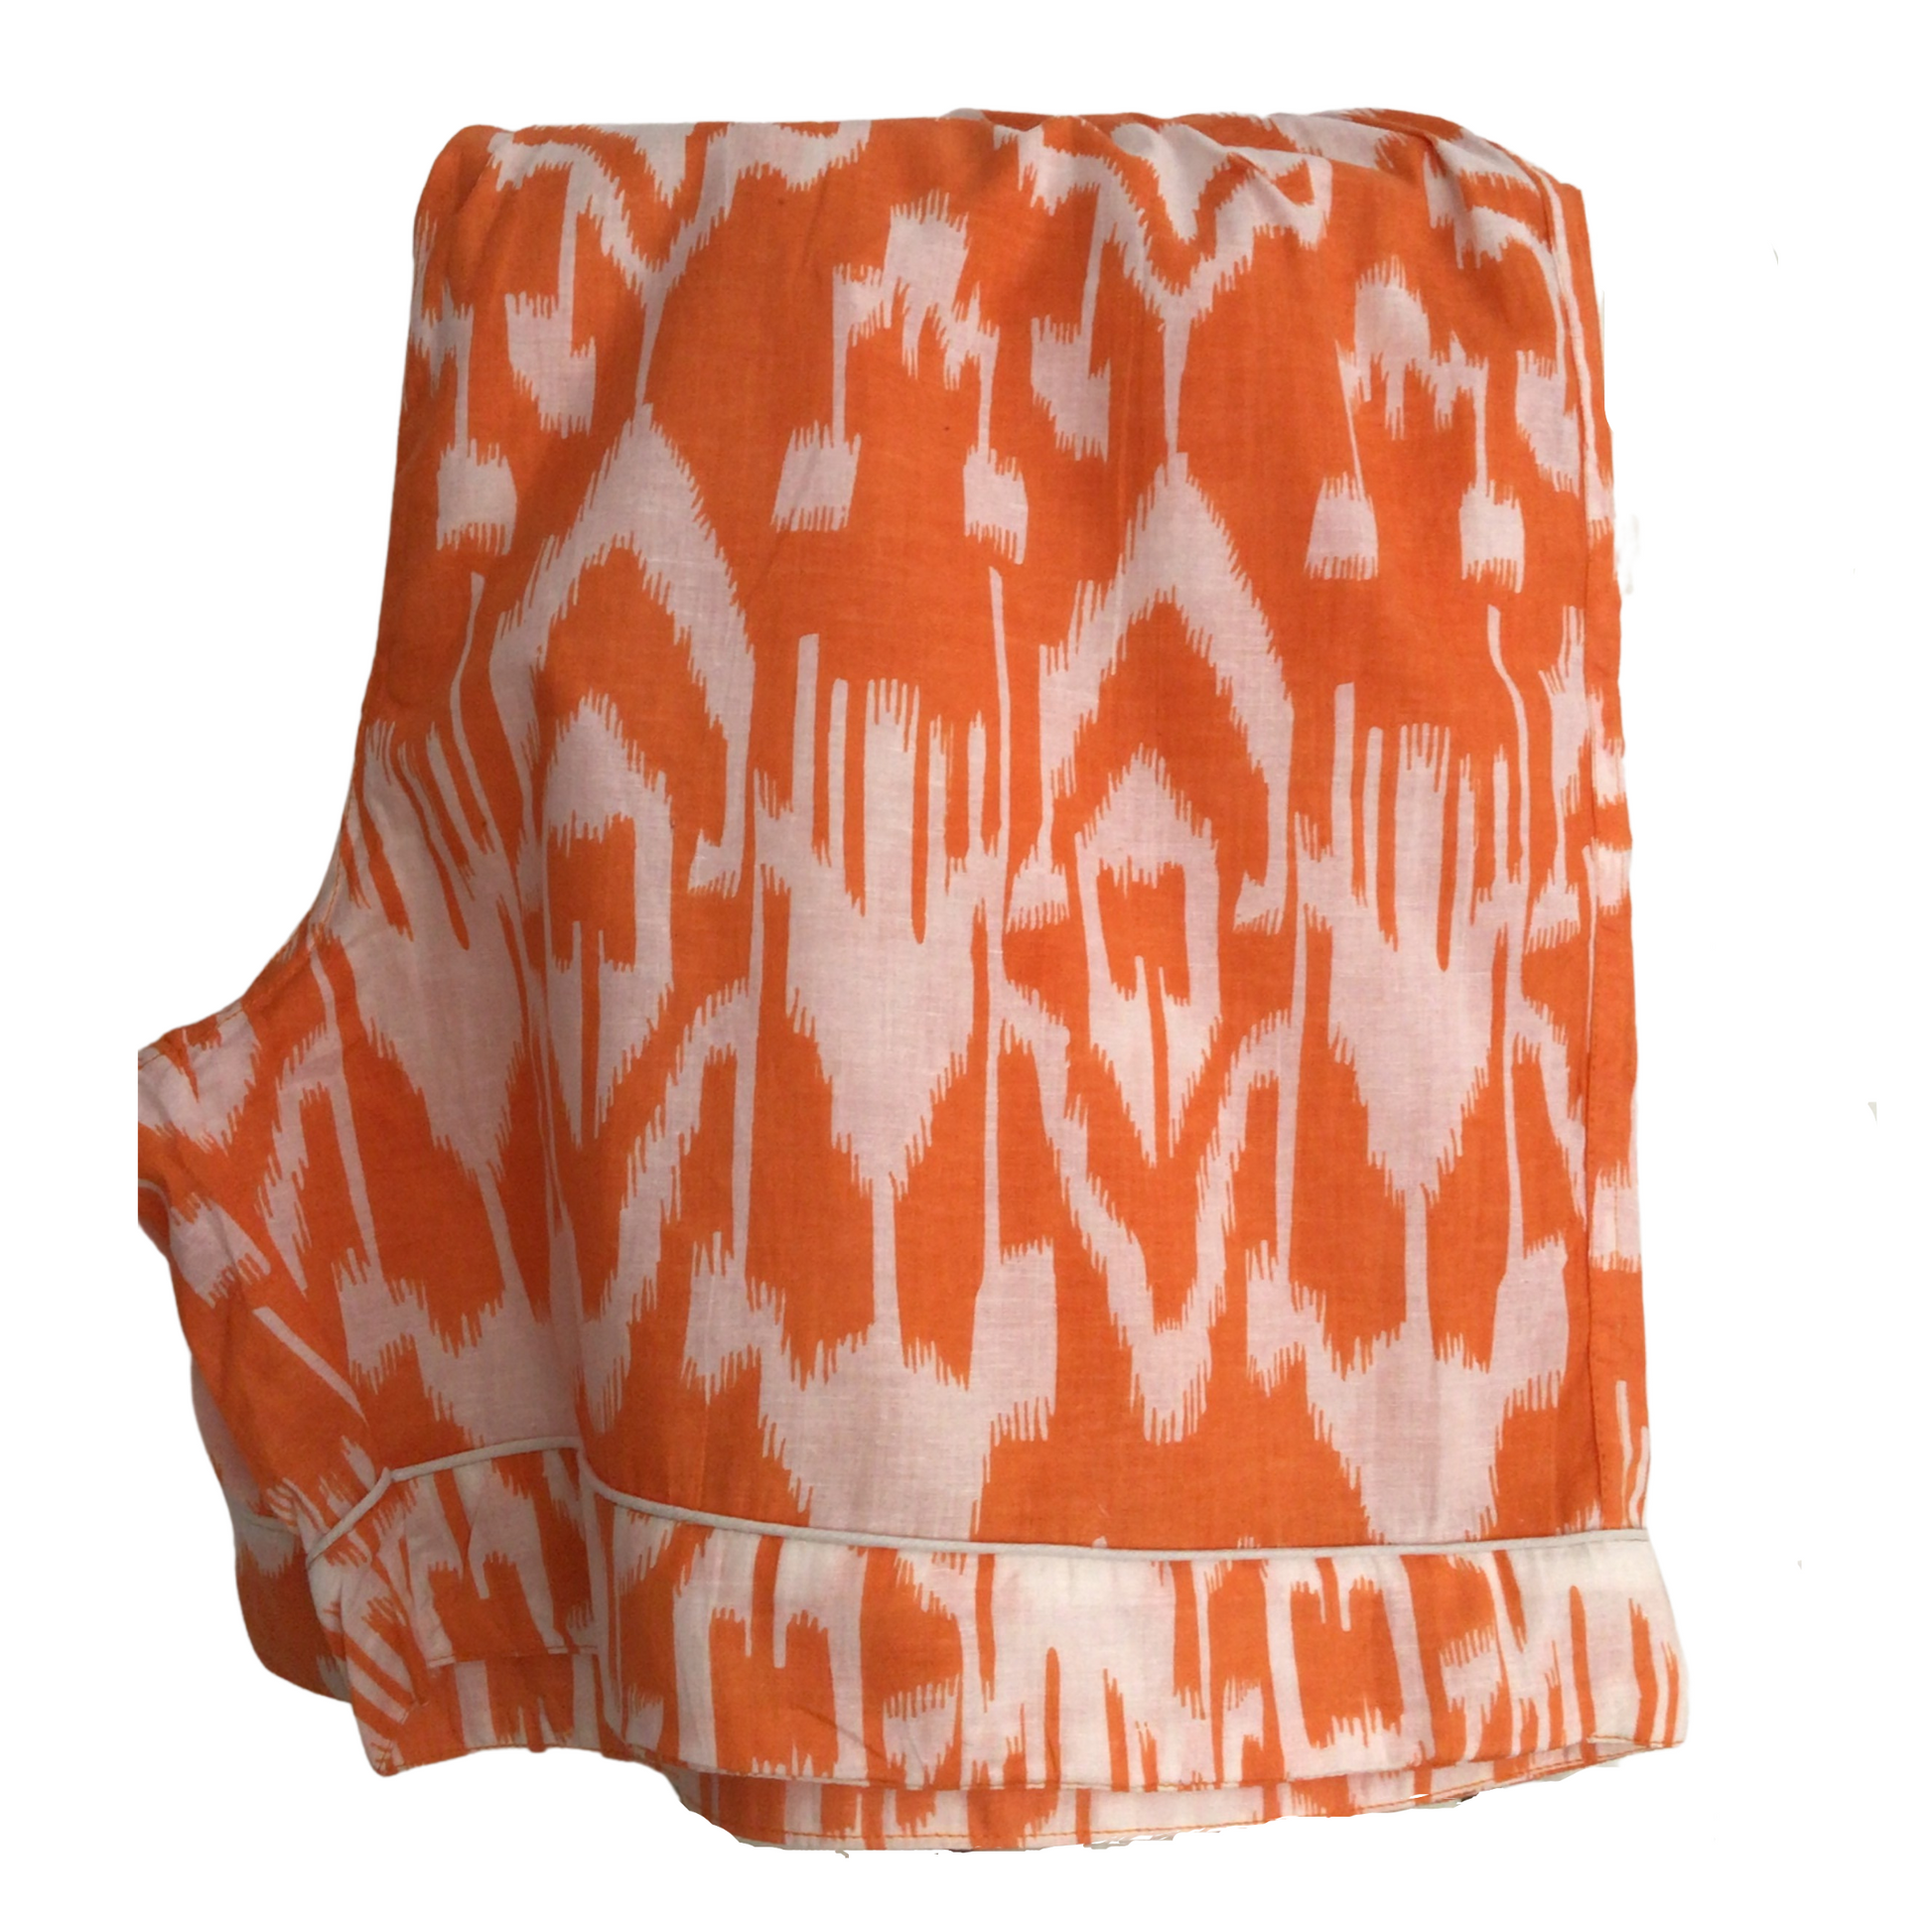 Luxury lounging with 100% fine cotton pjs. Tangerine and white Ikat. Ladies pyjamas. Classic pyjama styling. Short sleeves and shorts with Elasticated waist. Presented in a beautiful cloth gift bag; nightwear made from hand-printed cotton. sleepwear for women, ladies pyjamas in orange, cotton short pjs, summer pyjamas